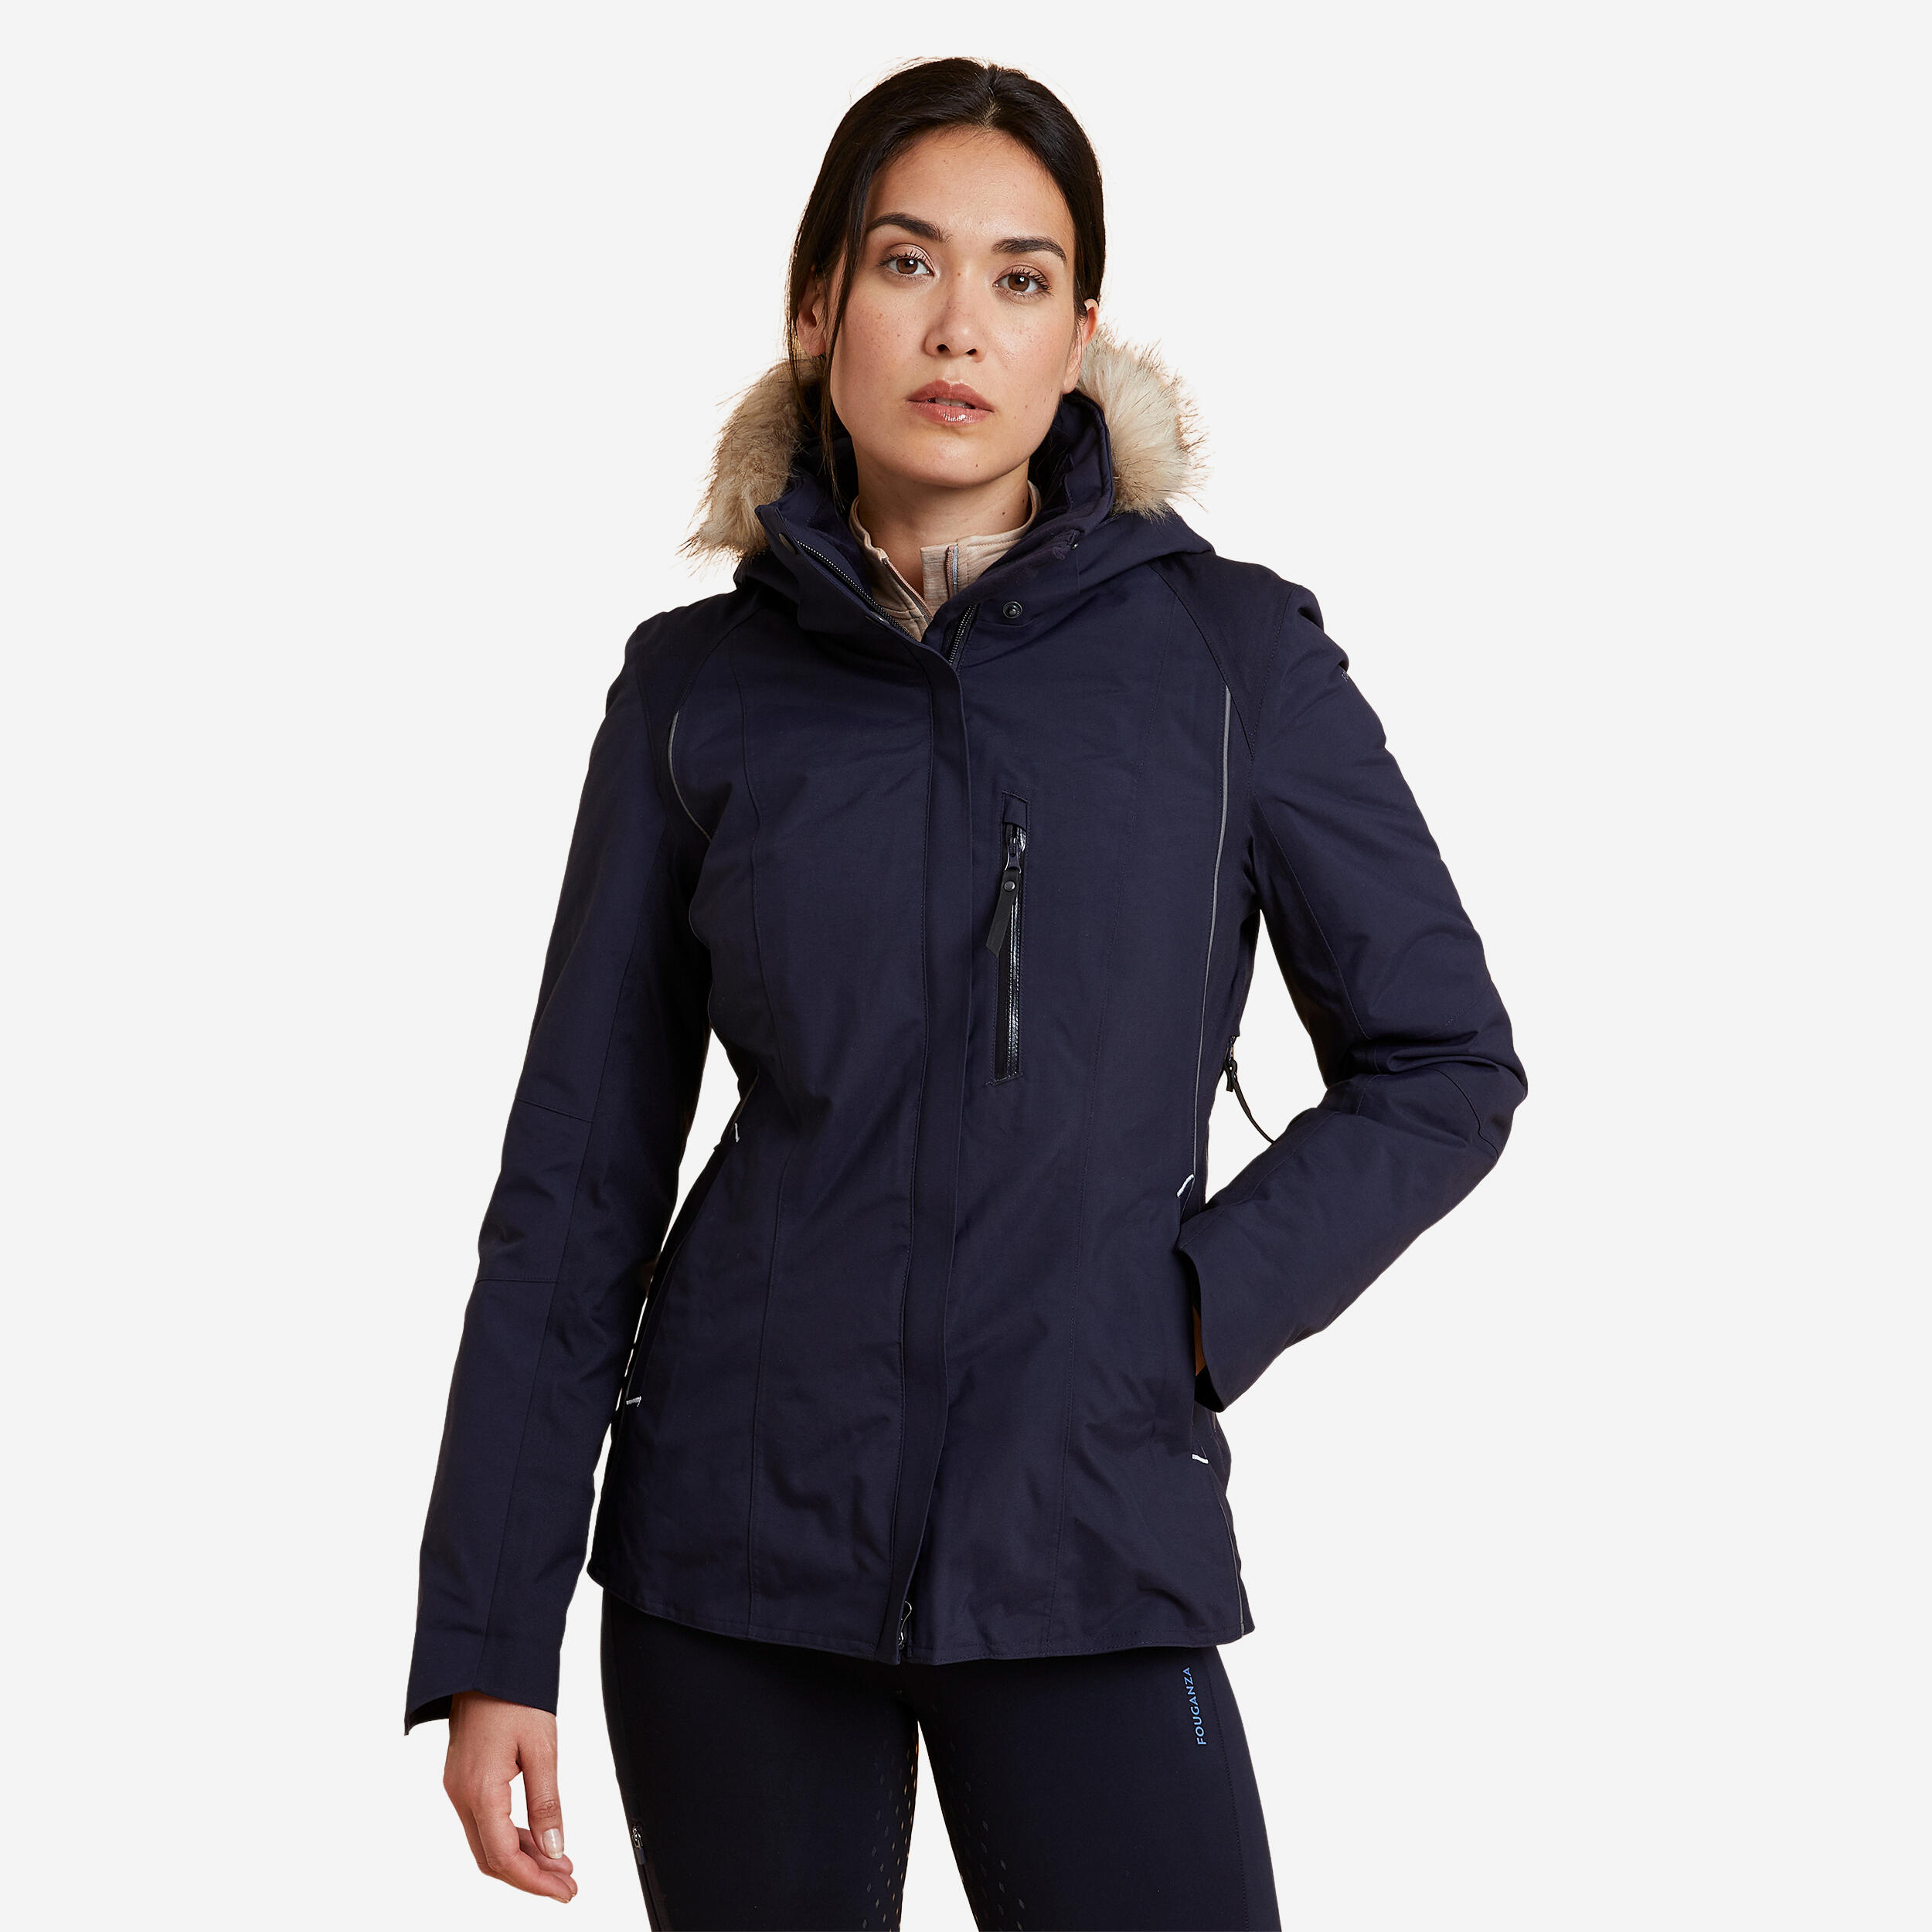 Image of Women's Warm and Waterproof Horse Riding Jacket - 580 Blue